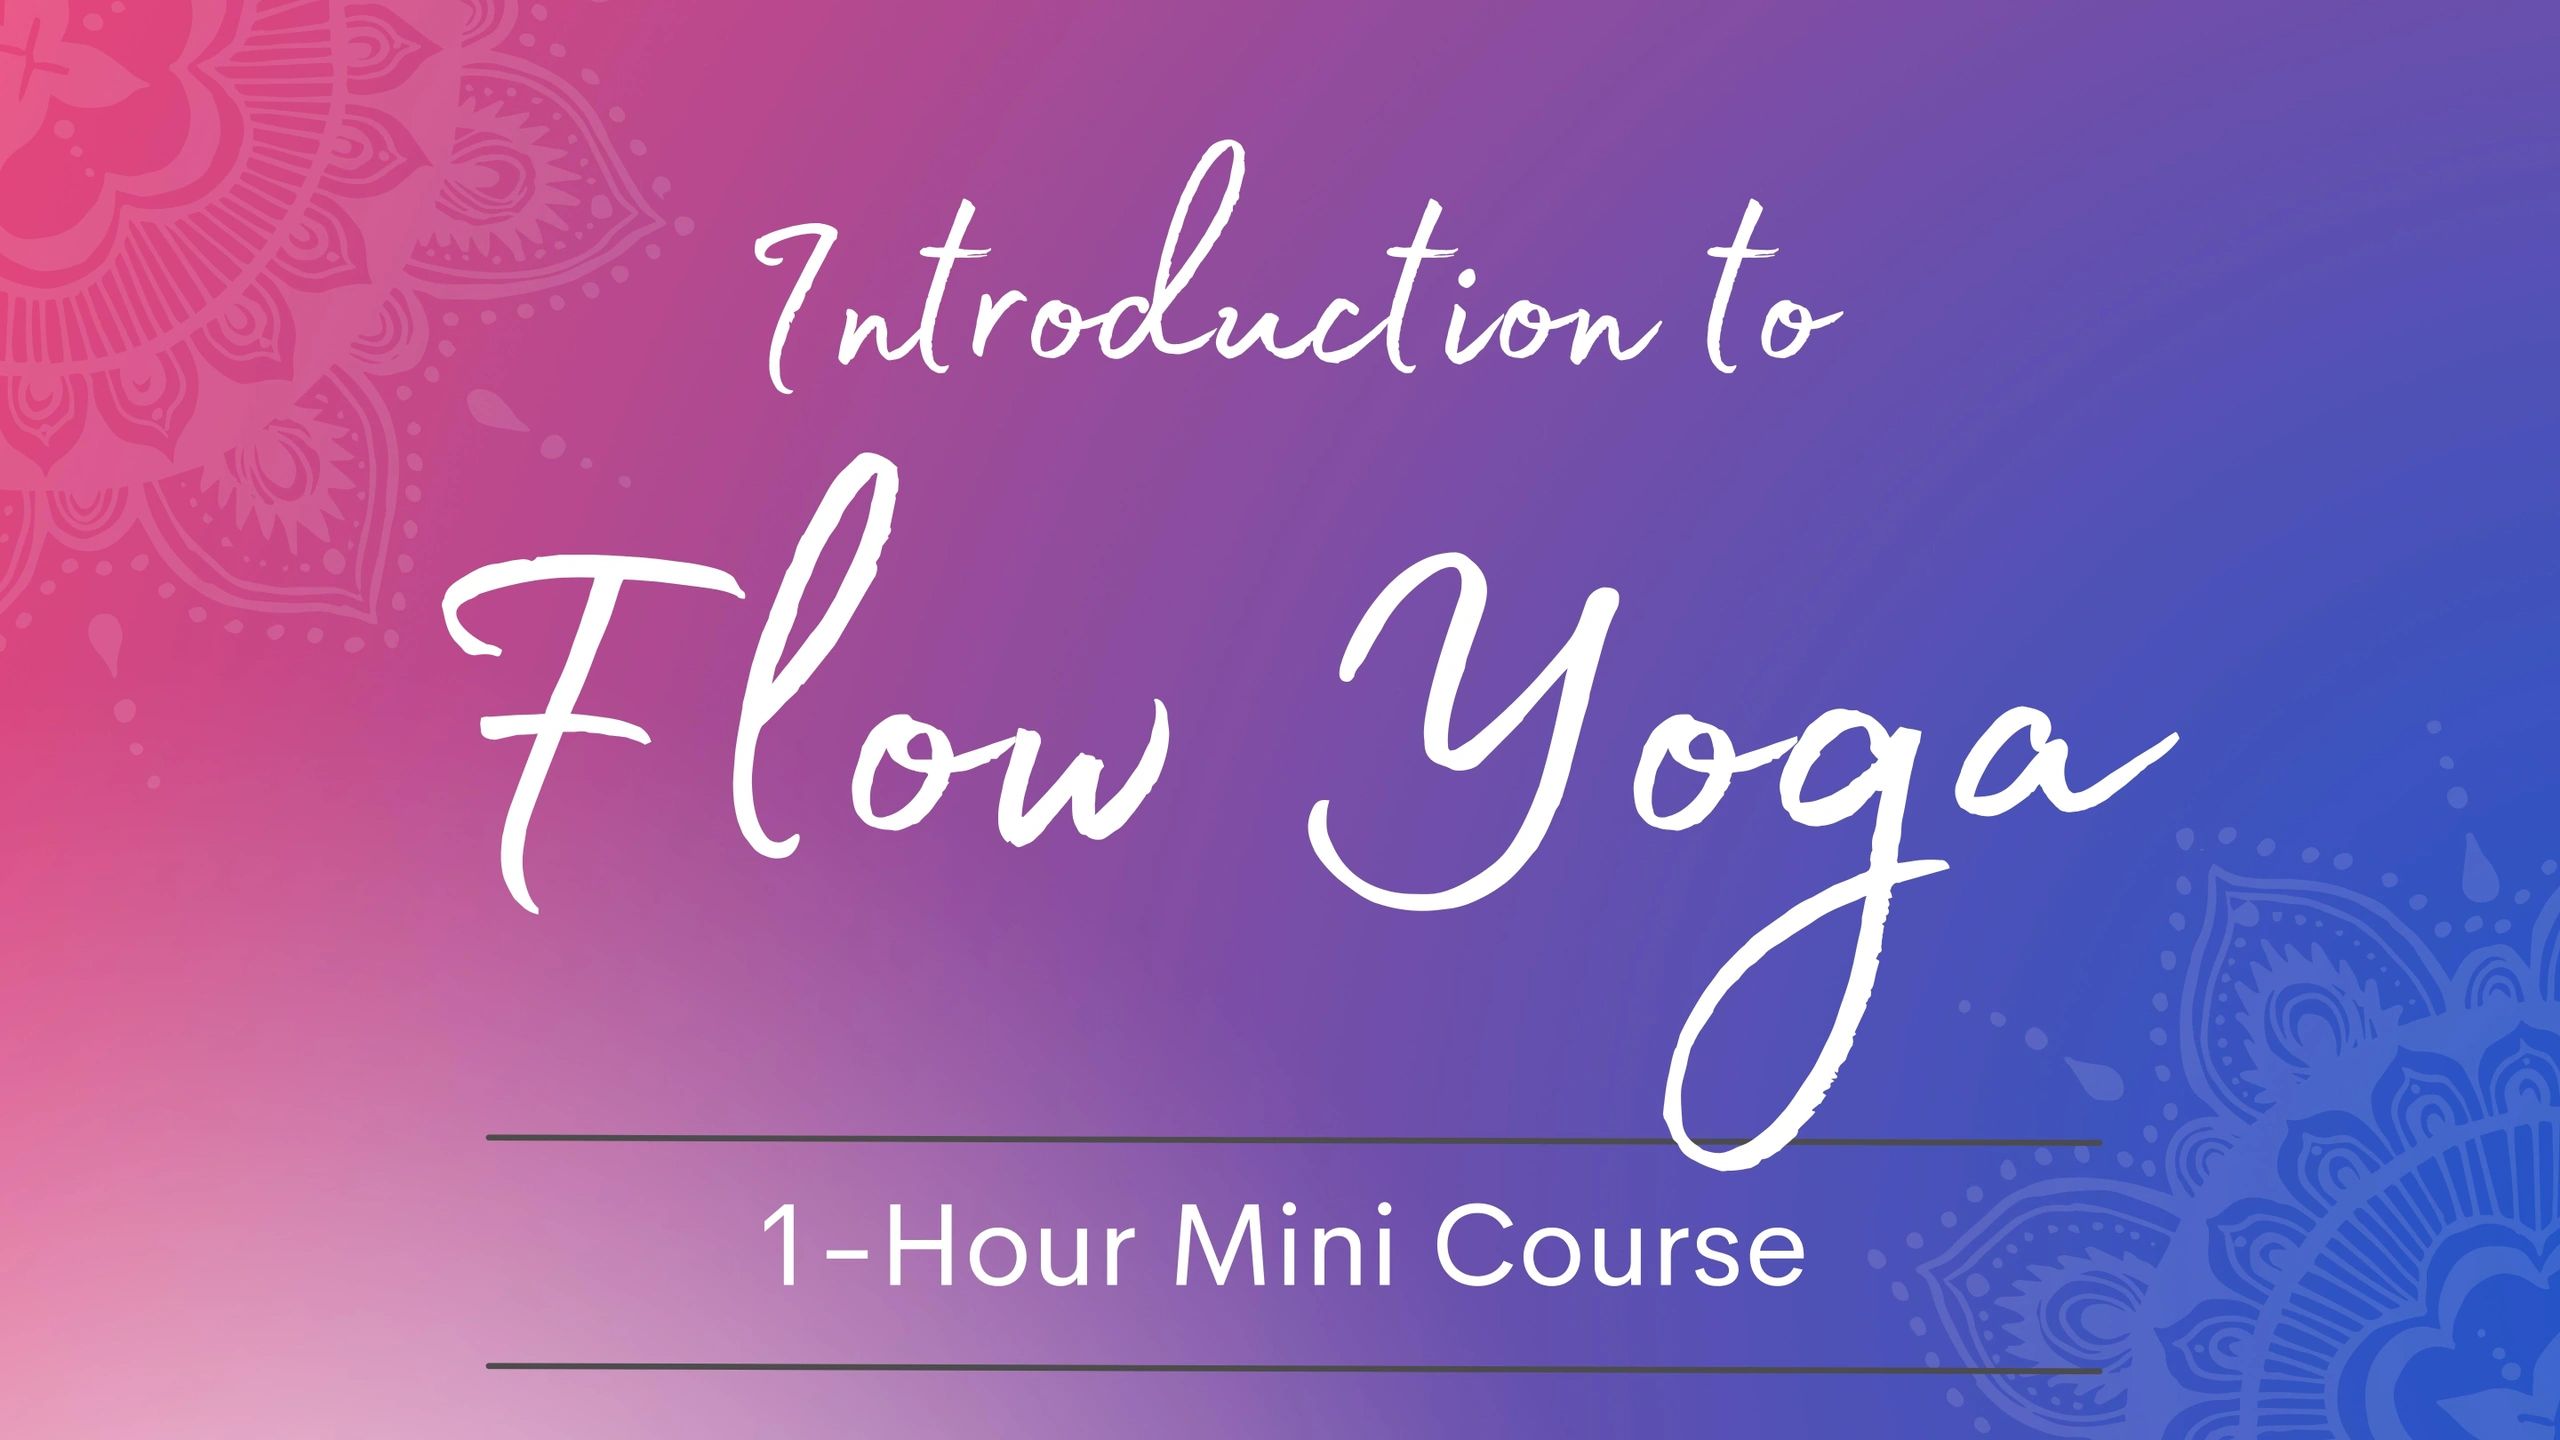 Introduction to Flow Yoga, a 1-hour mini course.